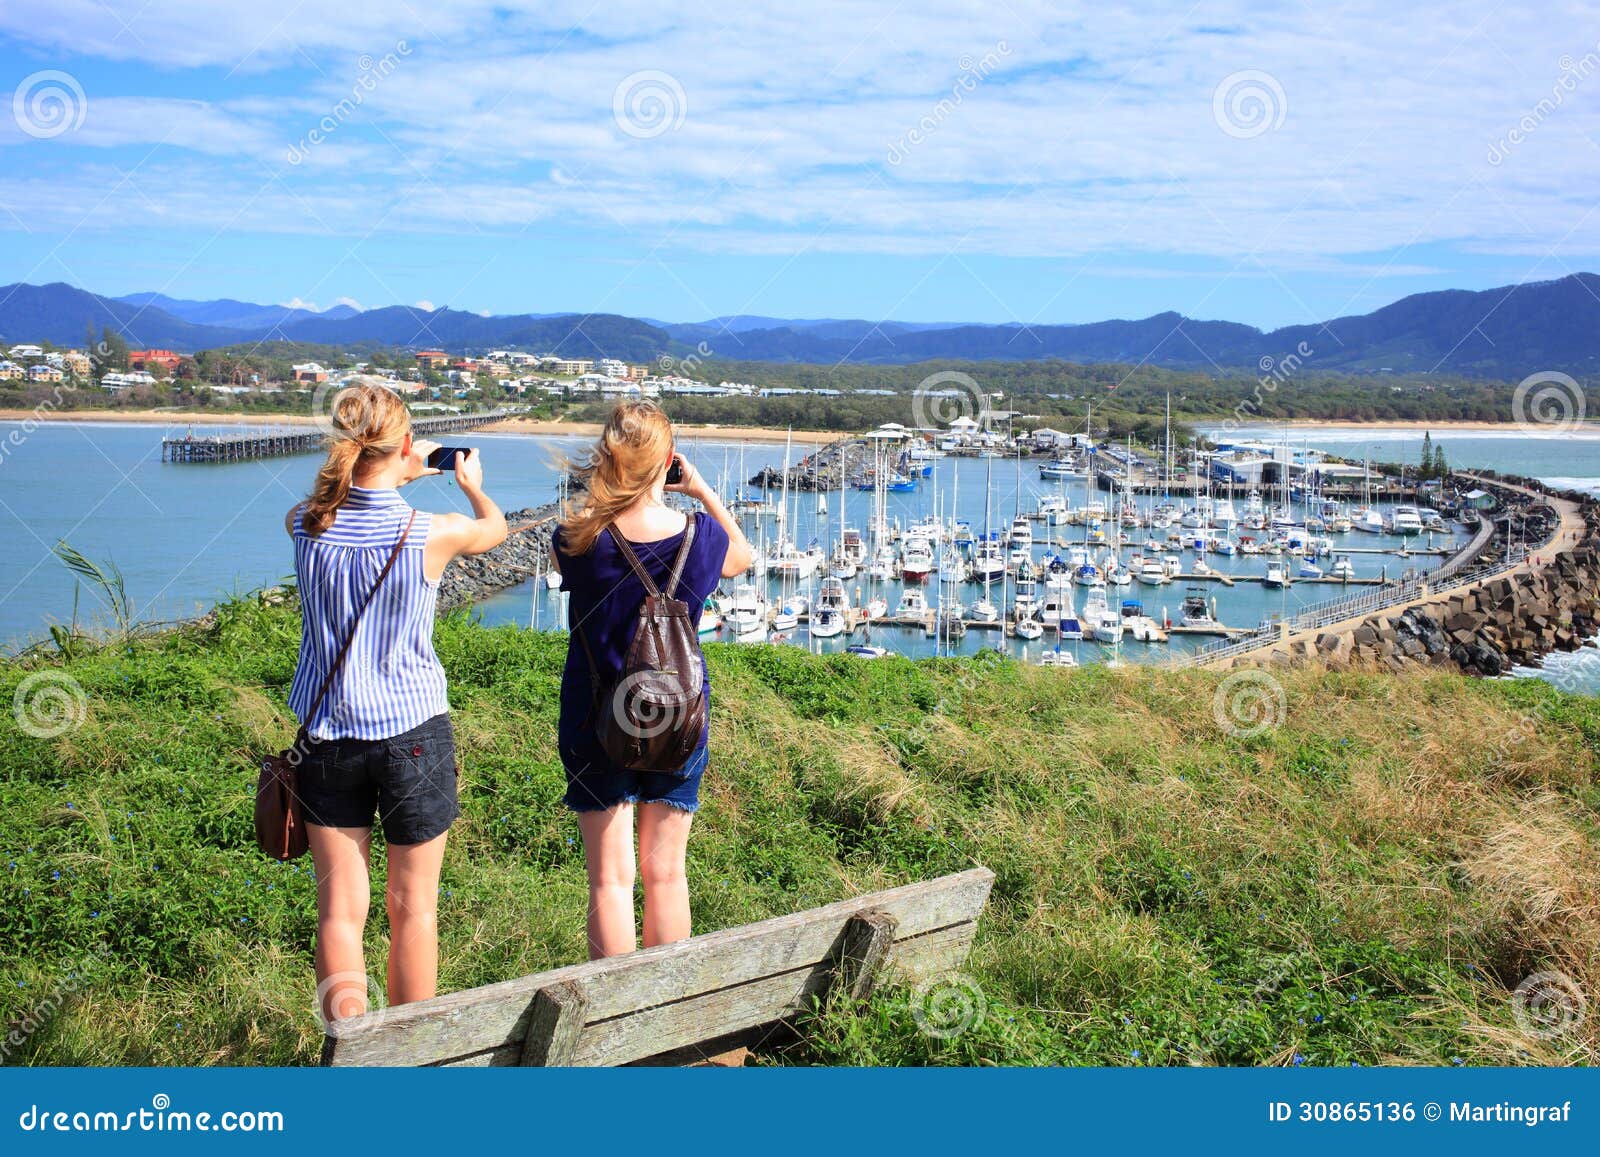 nature reserve, marina and women, coffs harbour